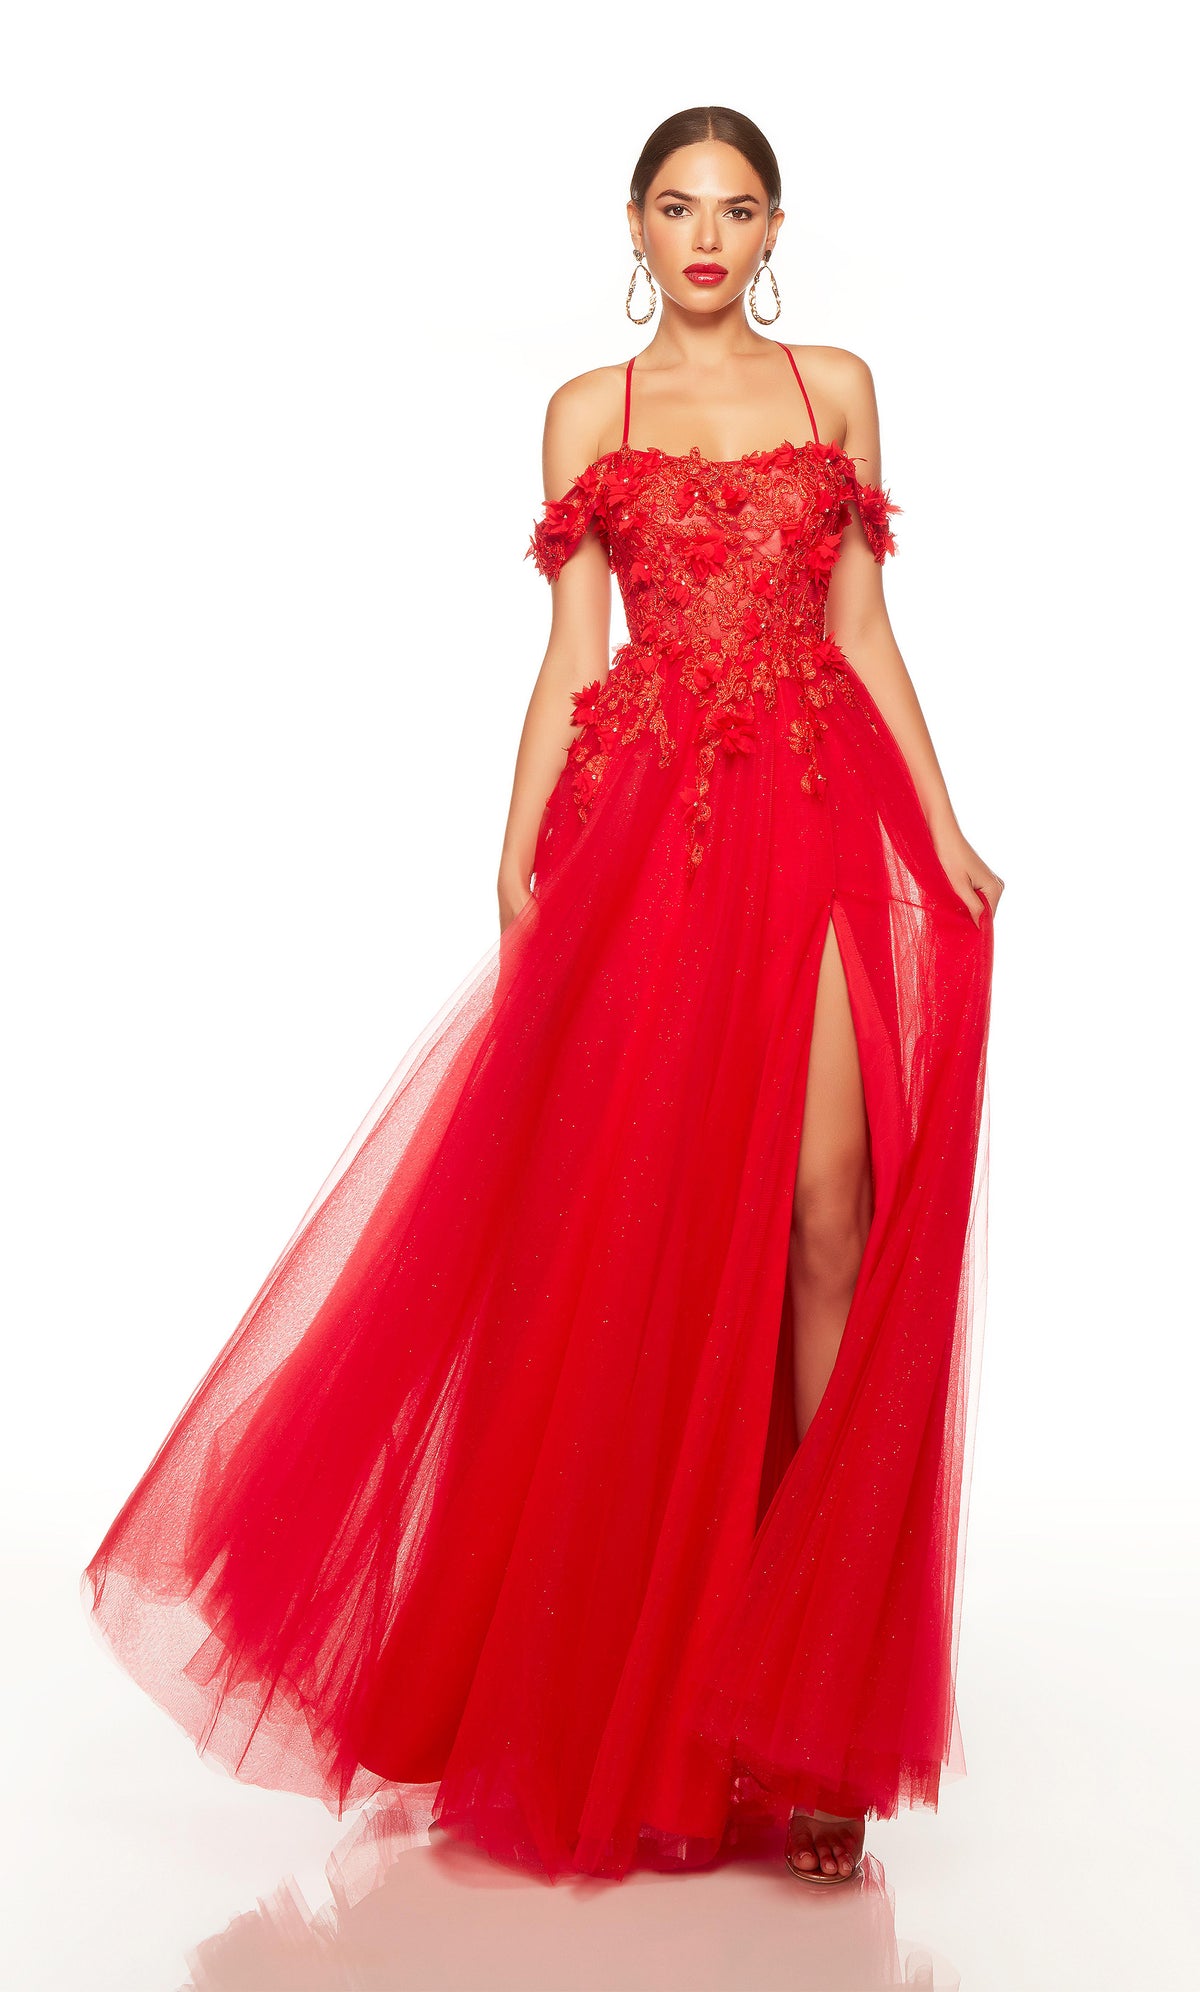 Sexy red formal dress a front slit and 3d flowers.